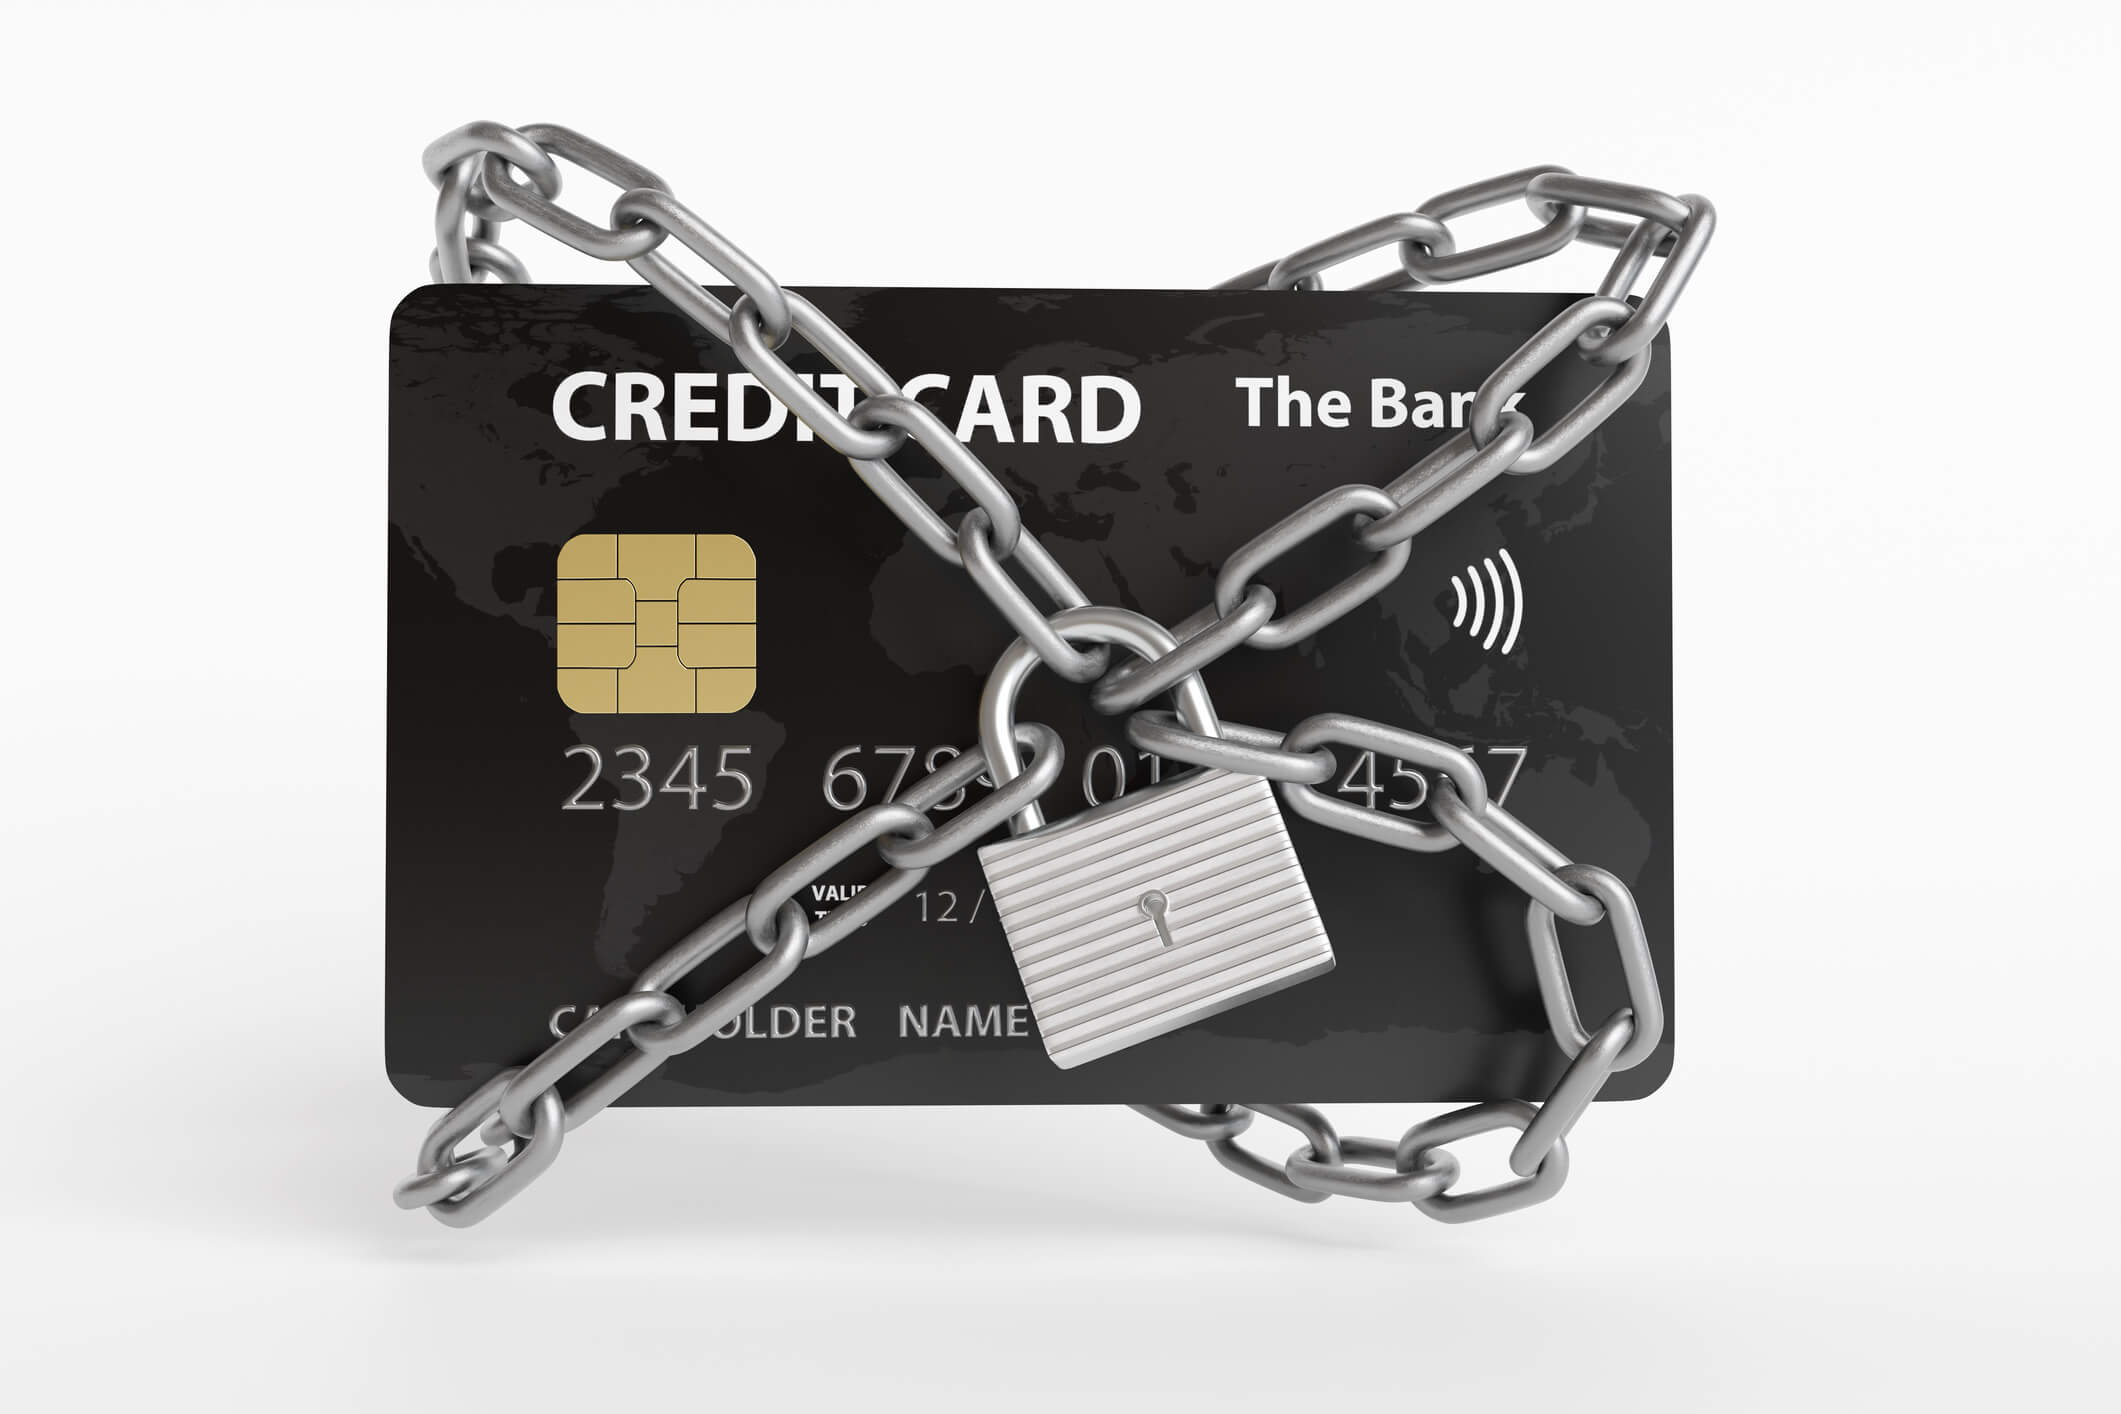 credit card chained up due to credit freeze